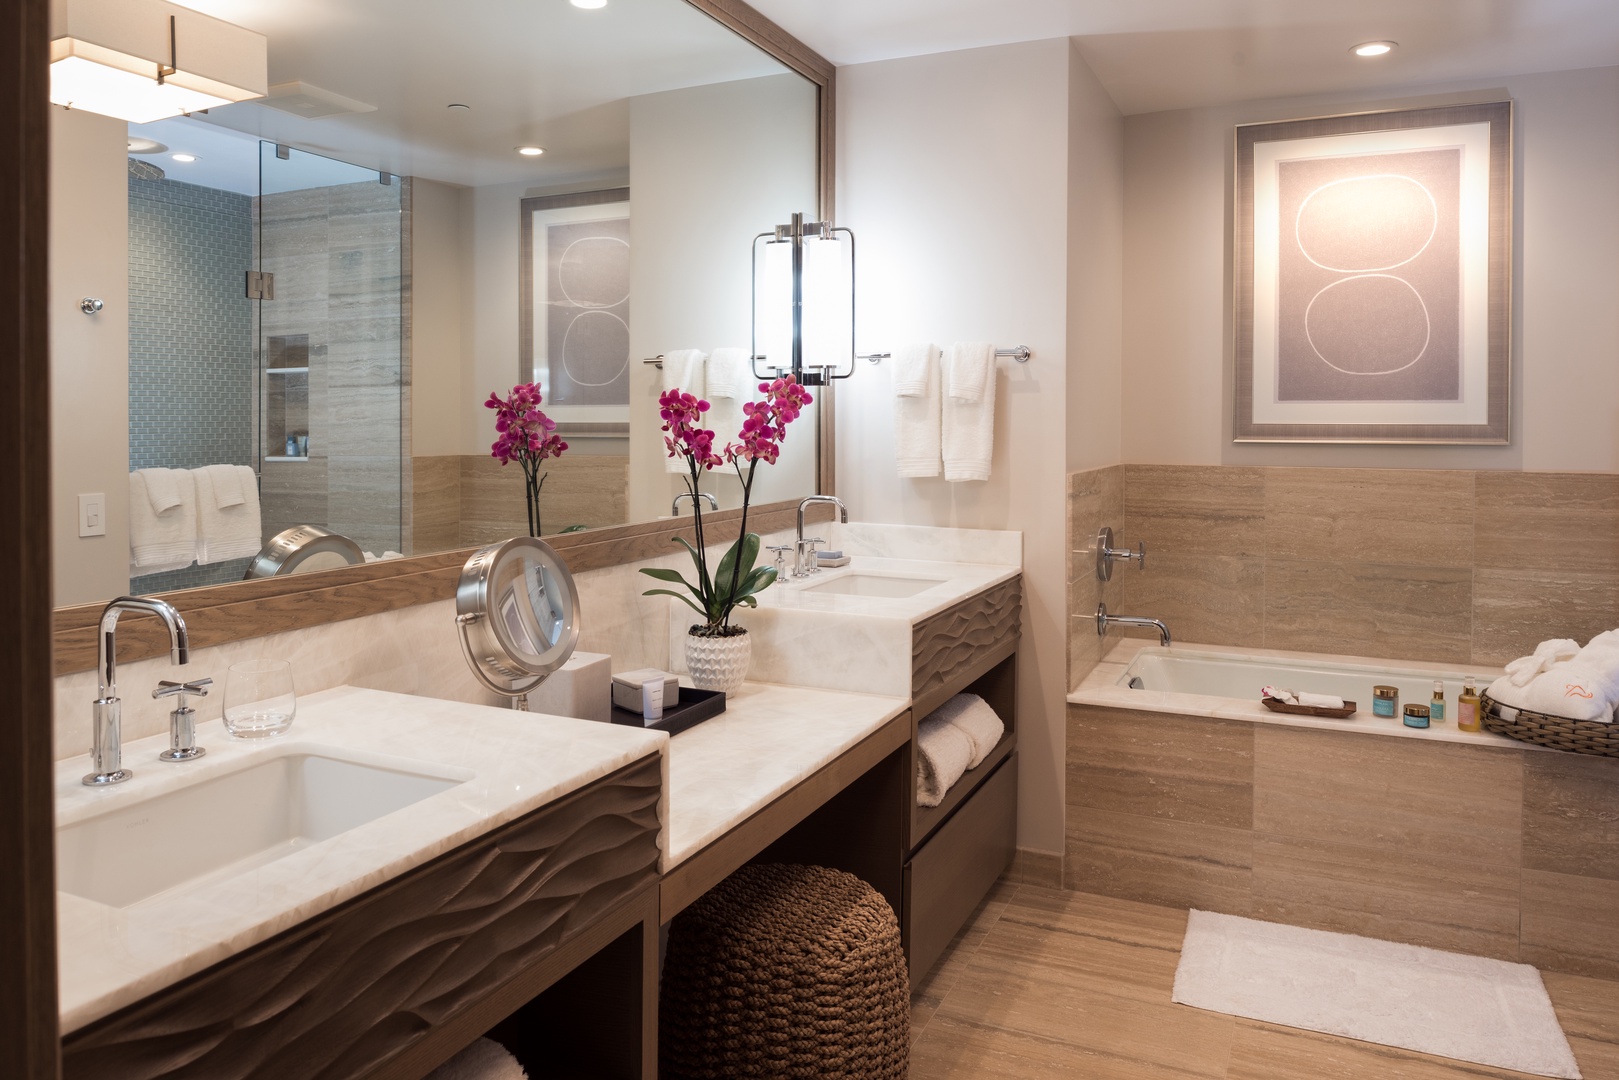 Lihue Vacation Rentals, Maliula at Hokuala 3BR Premiere* - A second bathroom also offers a tub, a walk-in shower, and dual sinks.